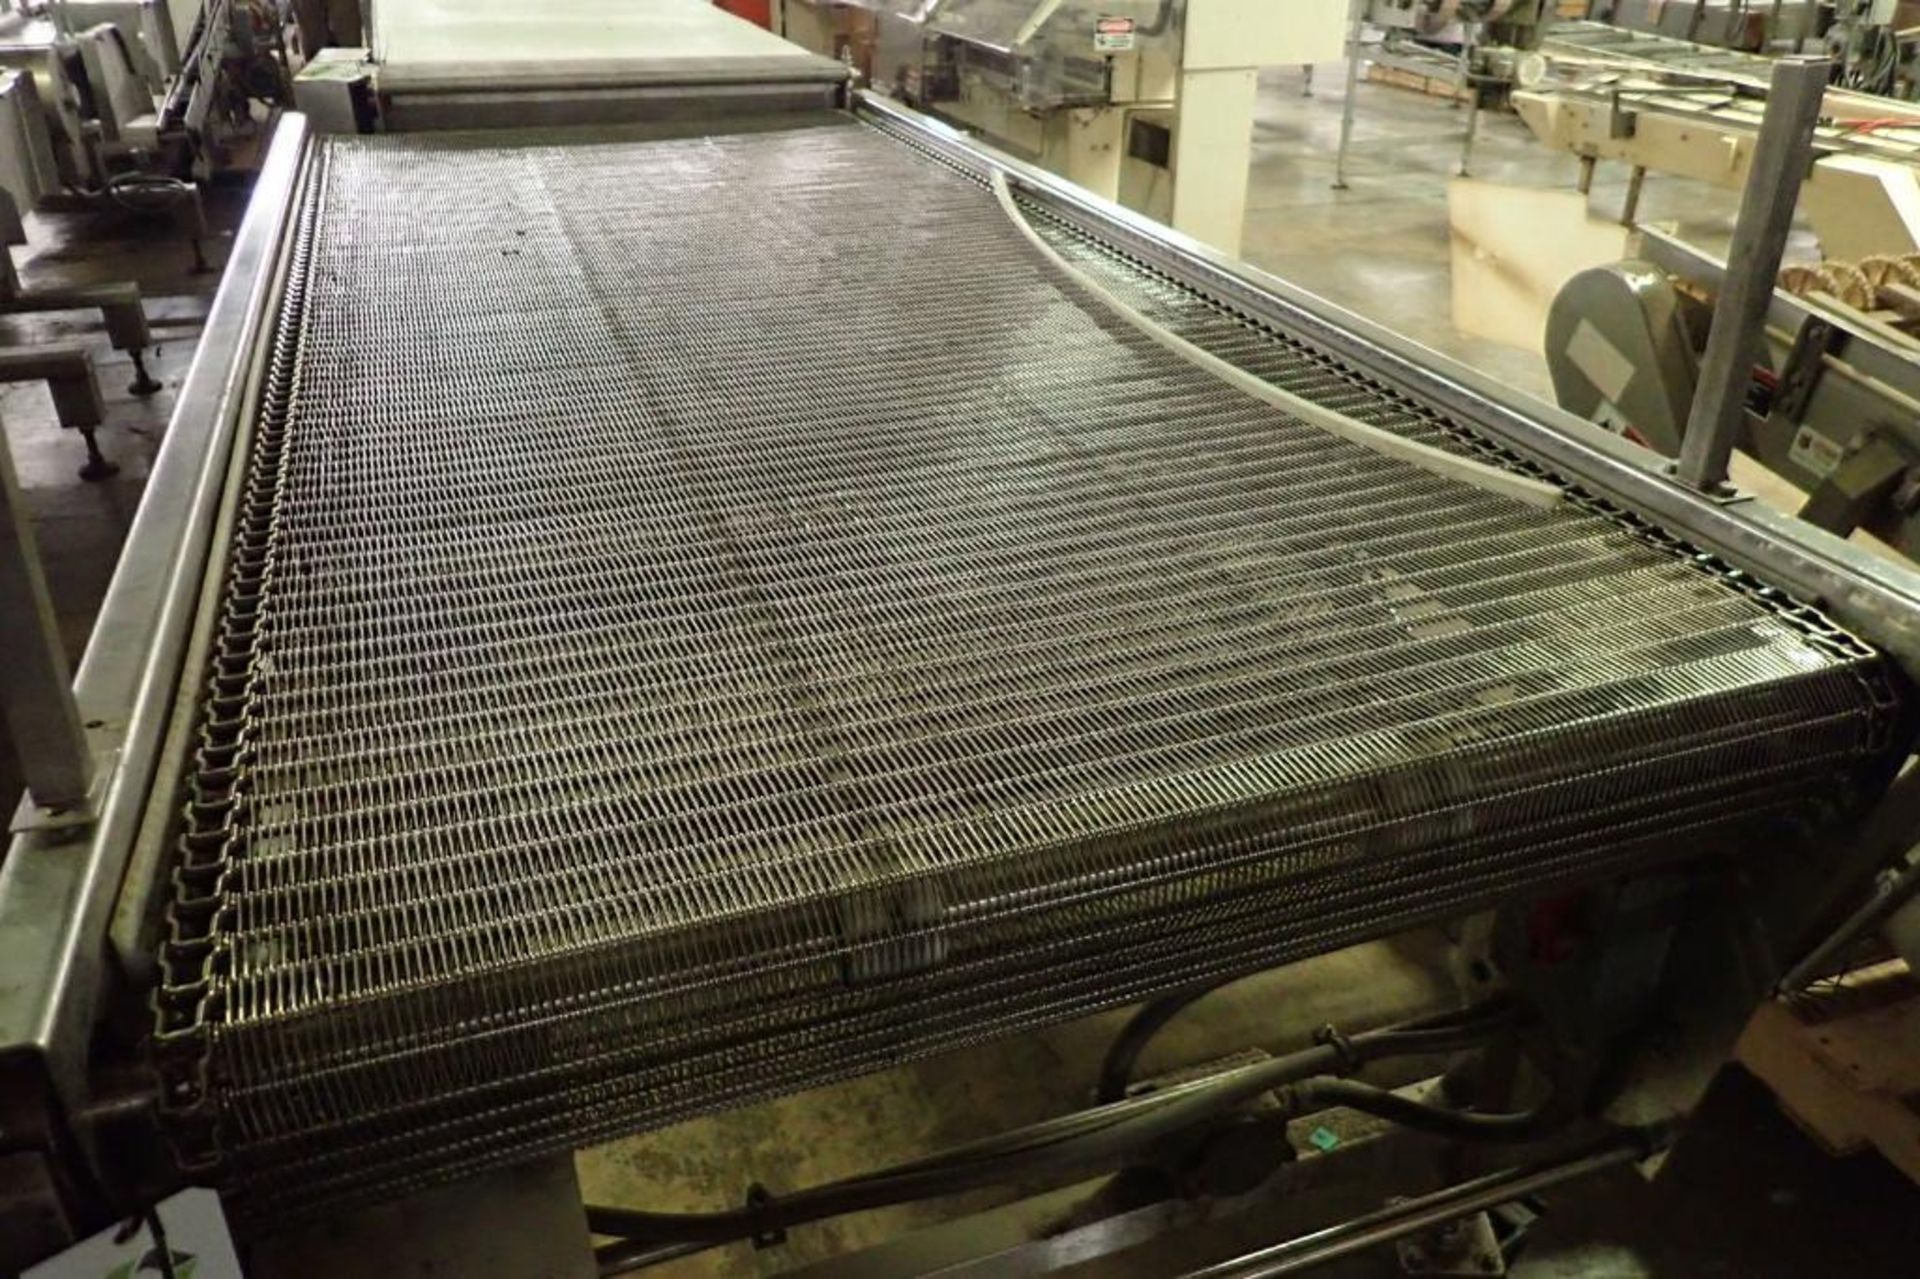 Kleenline SS conveyor {Located in Indianapolis, IN} - Image 3 of 6